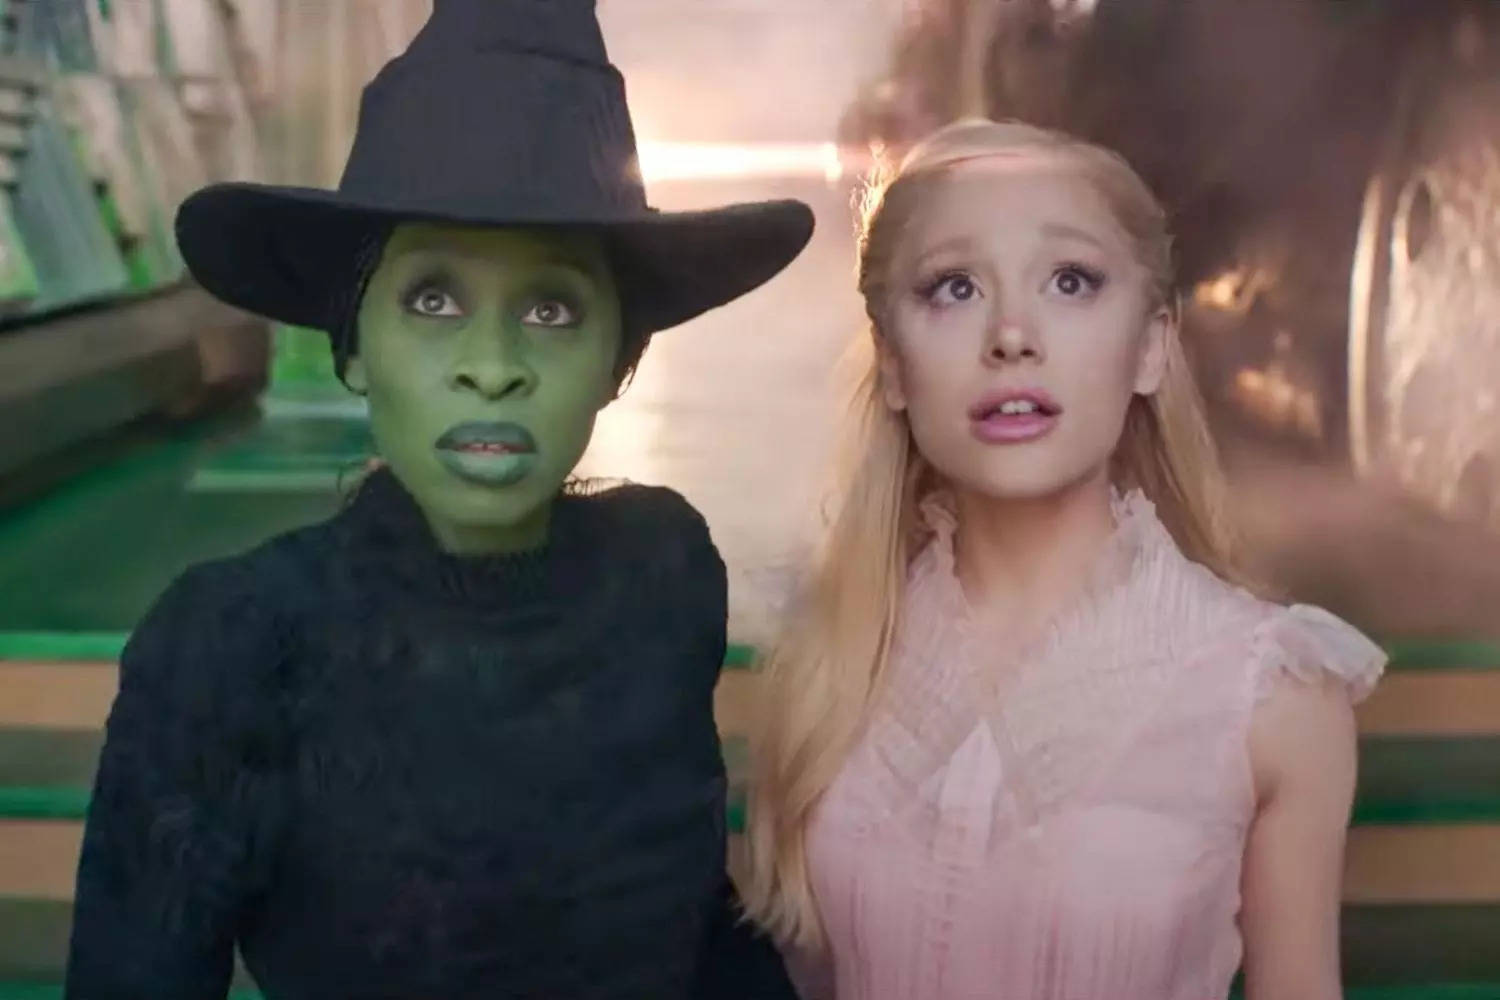 Cynthia Erivo at the Wicked Witch and Ariana Grande as Glenda the Good